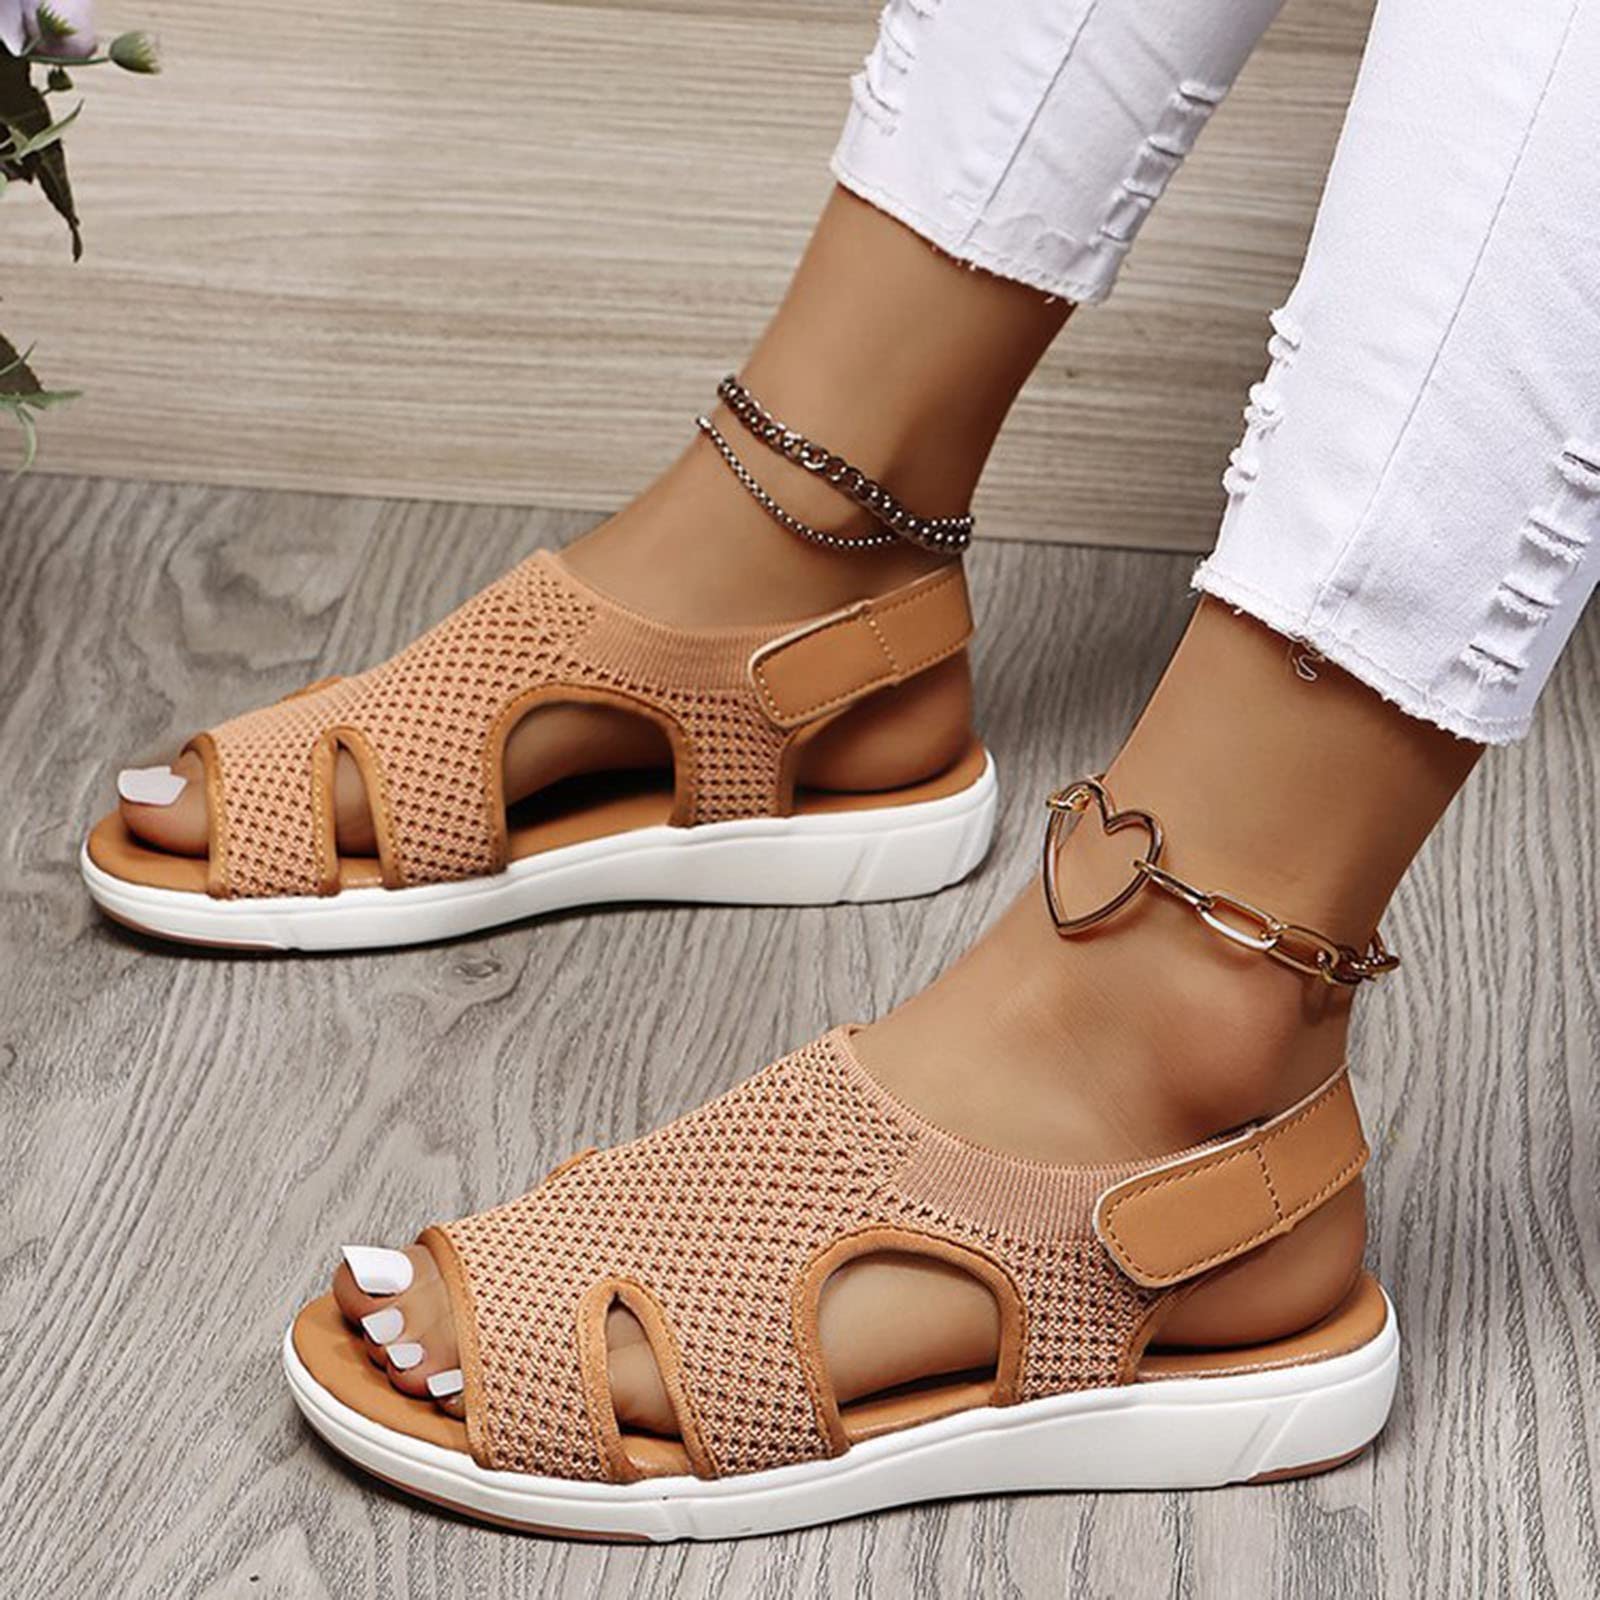 USYFAKGH Womens Ankle Strap Low Platform Wedge Sandals Couple Shoes Slippers Leisure Fashion Casual Breathable Shoes Lovers Women